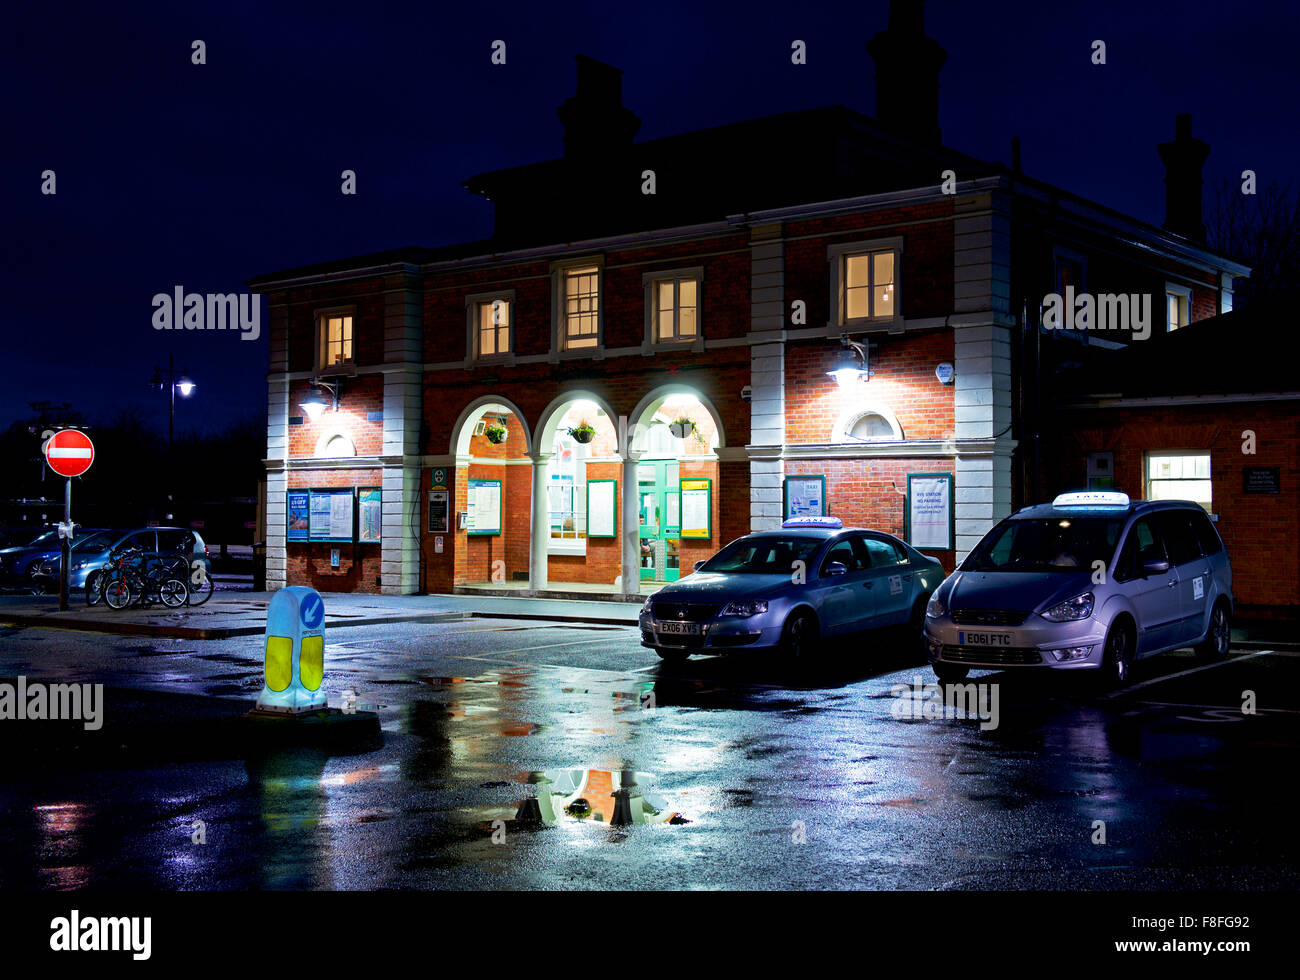 The railway station at night, Rye, East Sussex, England UK Stock Photo